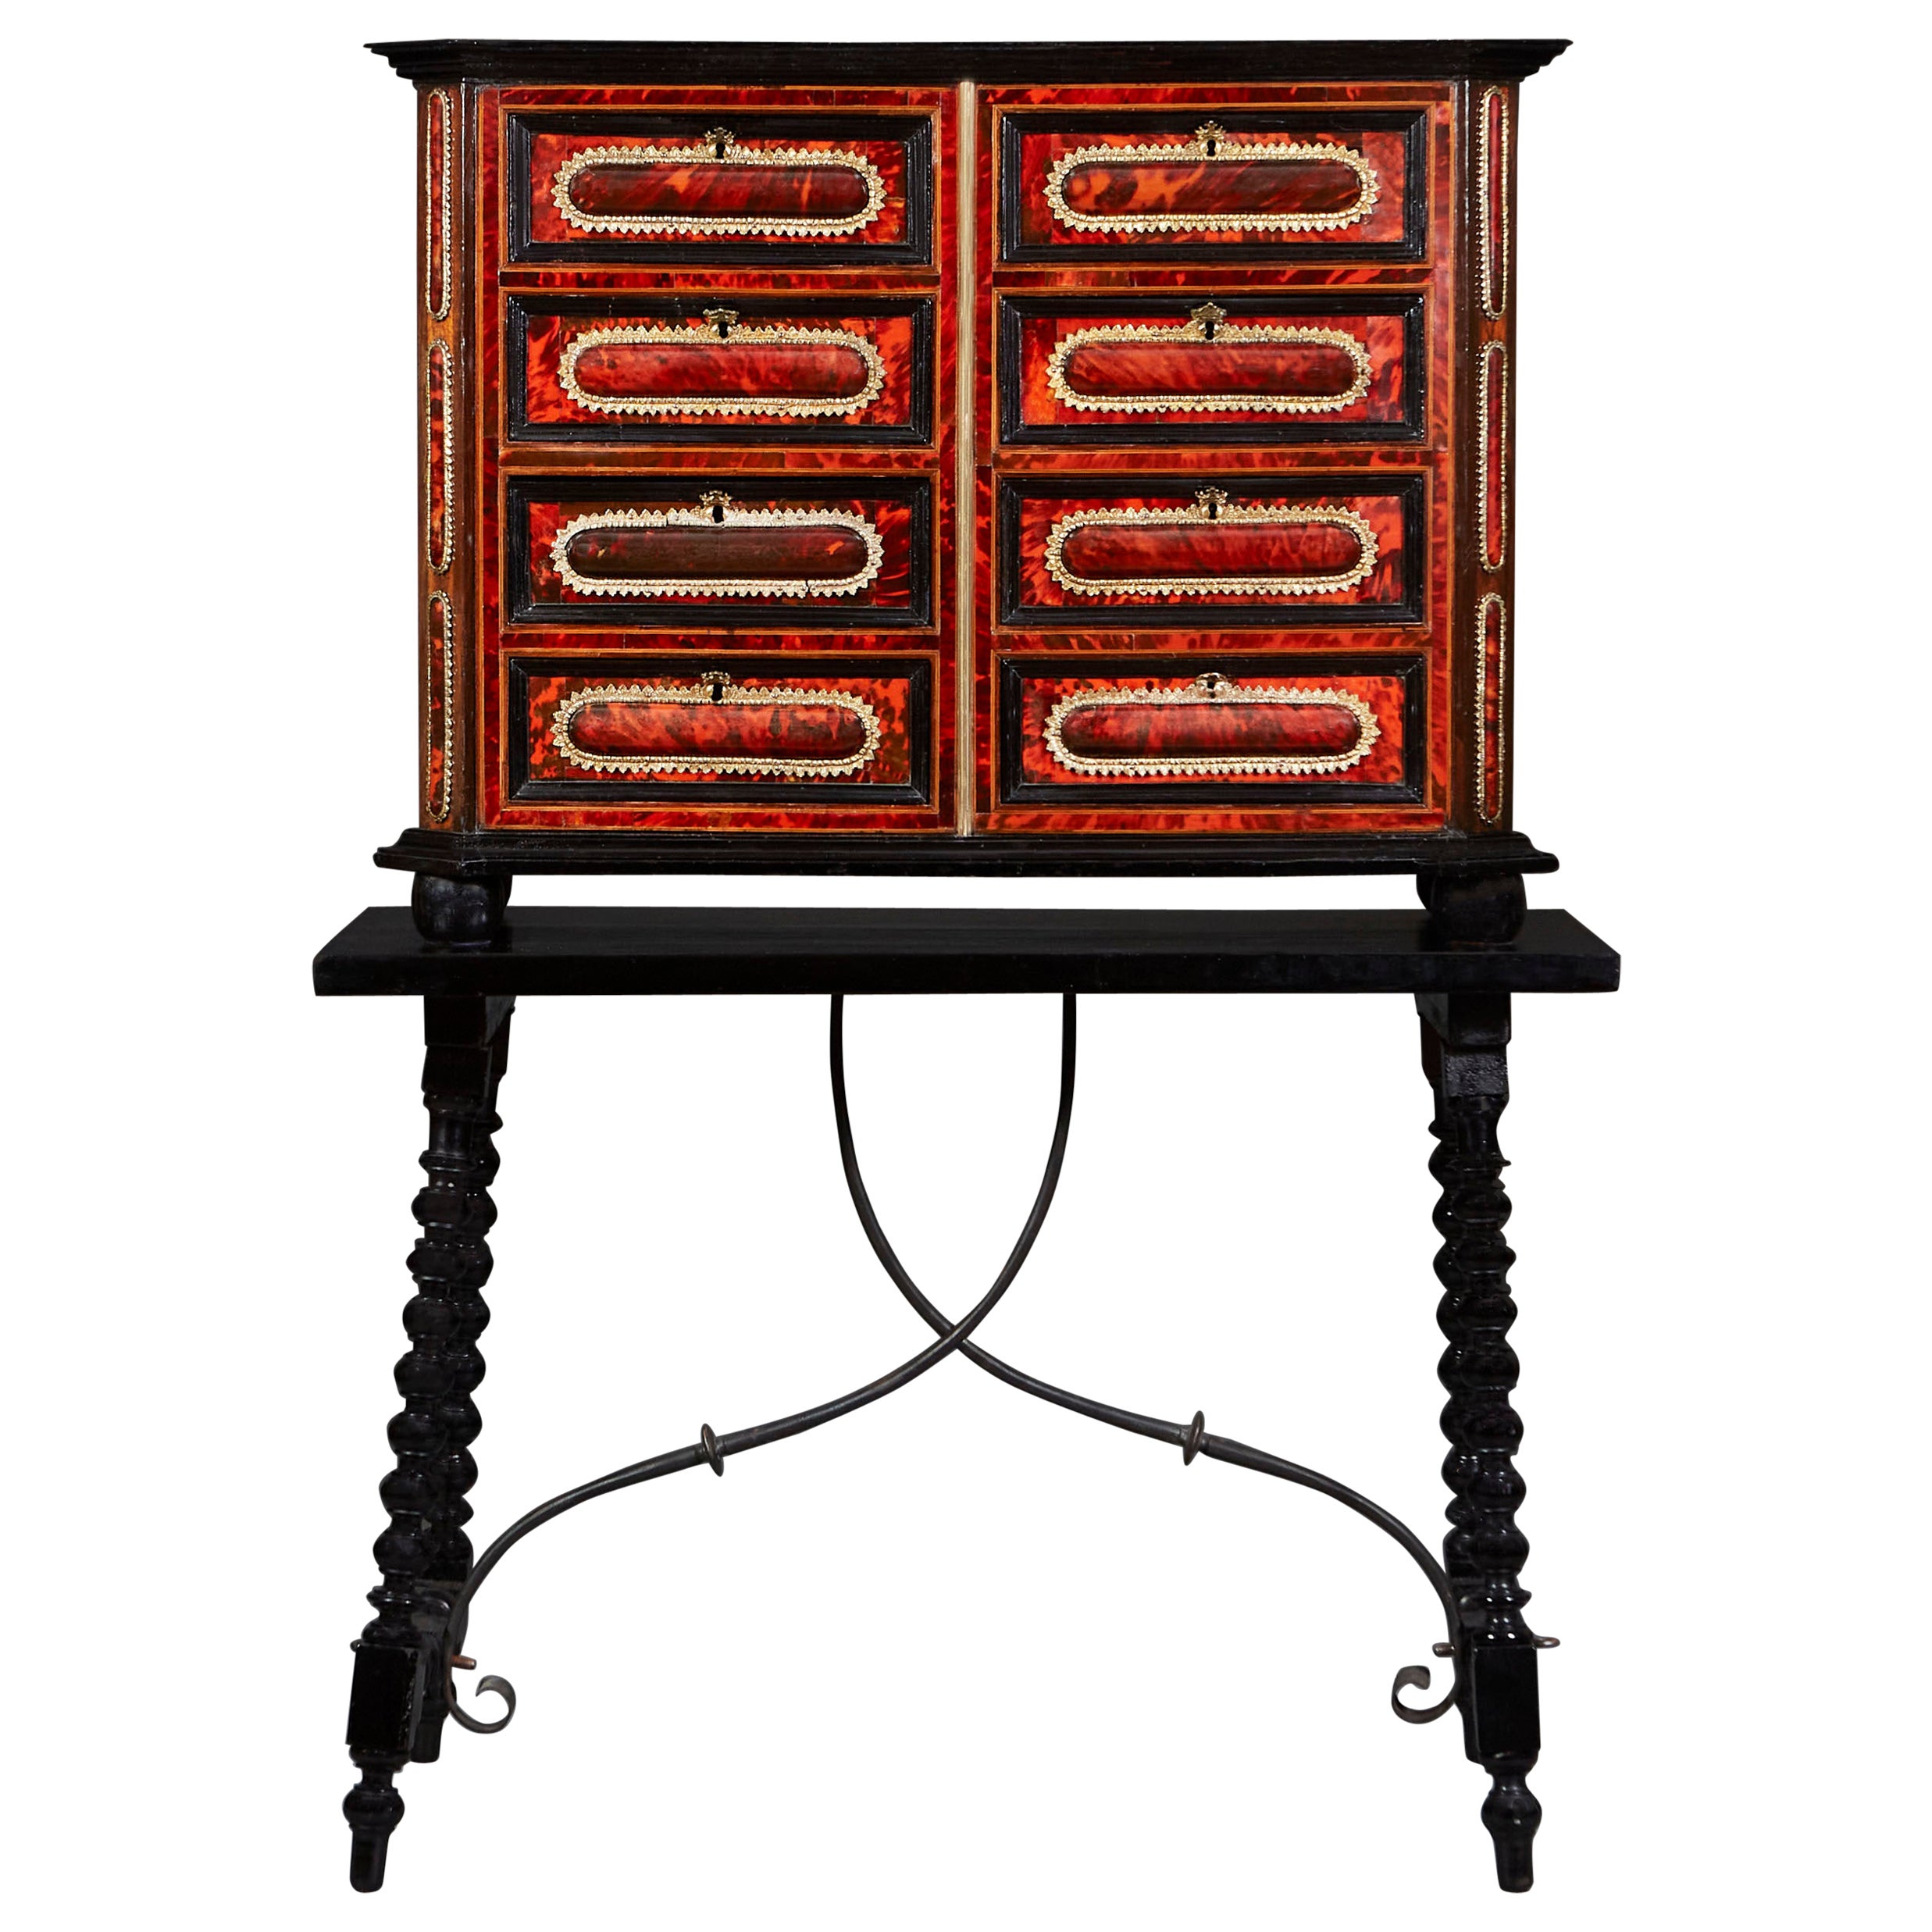 A Spanish Early 19th Century Tortoiseshell Cabinet on Stand